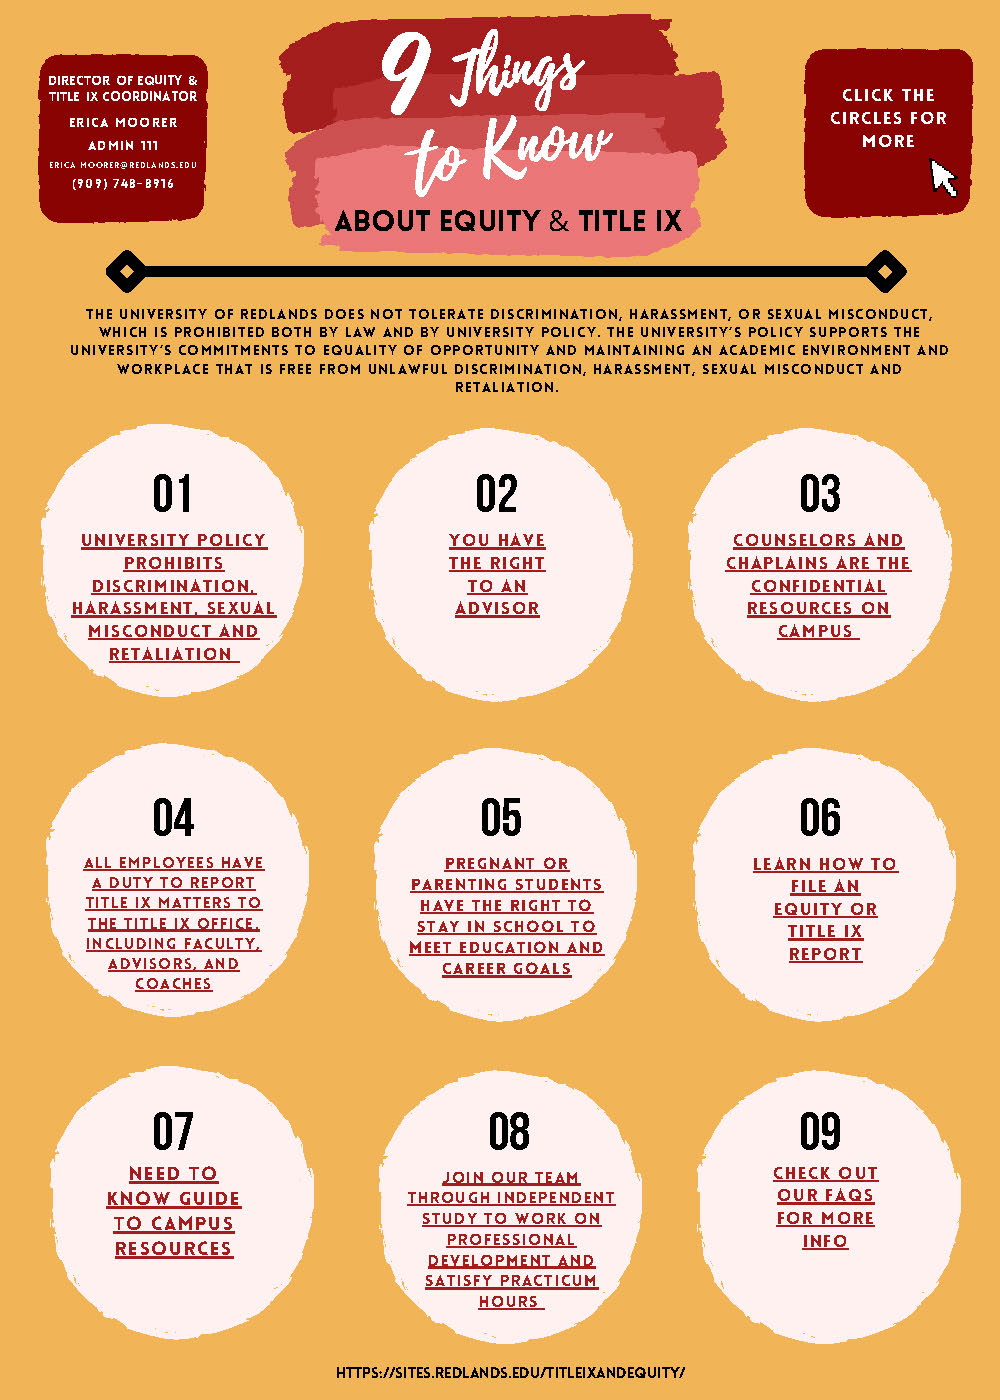 9 Things To Know About Equity and Title IX Flyer (Oct 2021).jpg